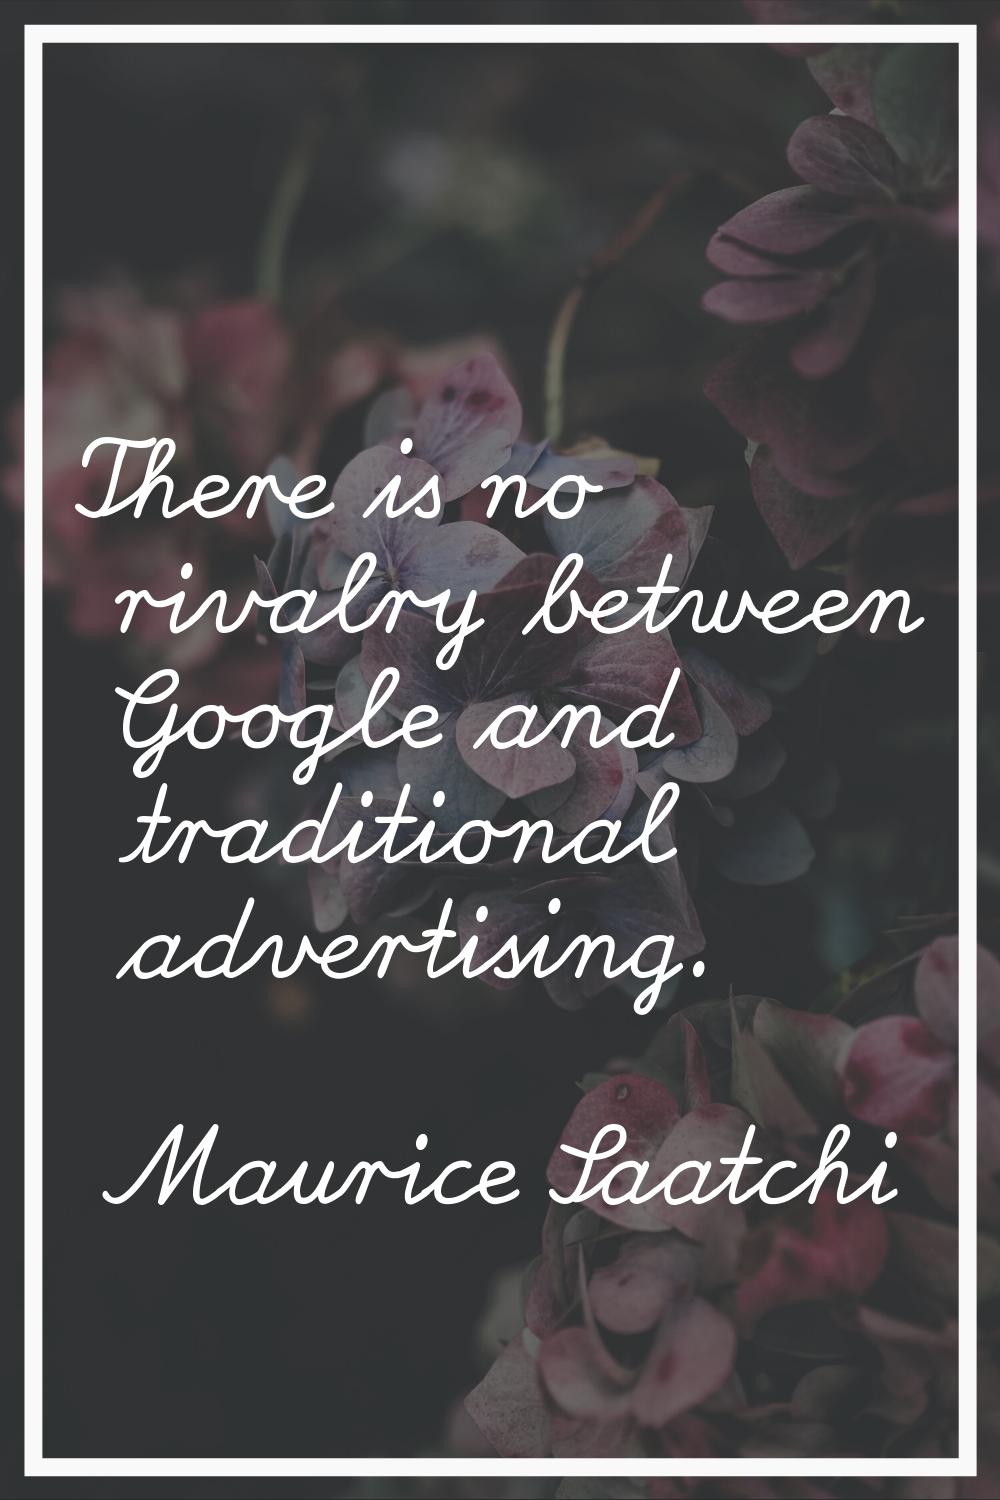 There is no rivalry between Google and traditional advertising.